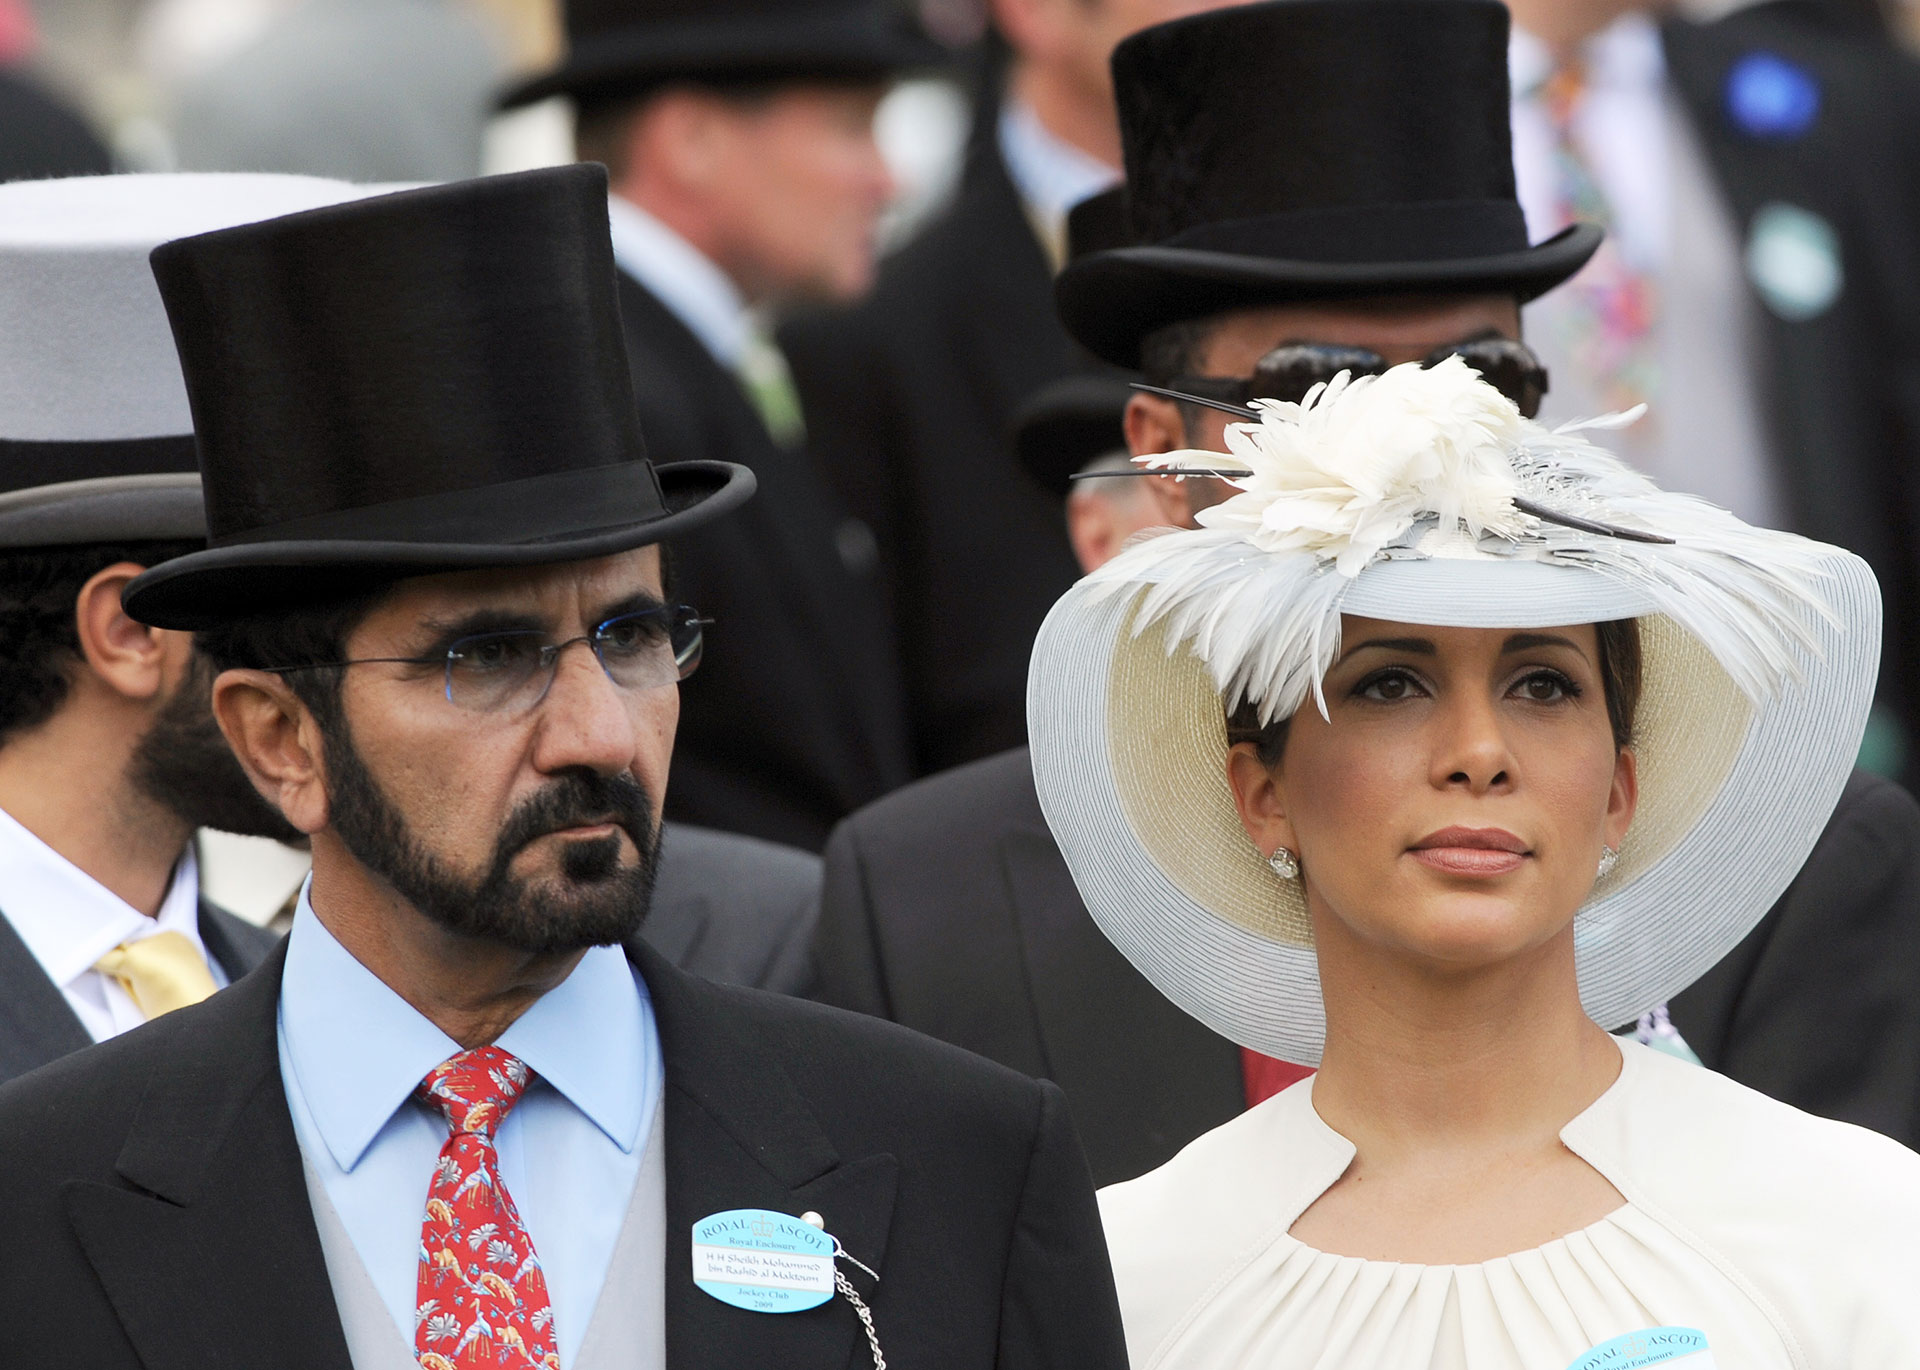 ASCOT, UNITED KINGDOM - JUNE 16:  Sheikh Mohammed bin Rashed Al Maktoum, Vice President and Prime Minister of the UAE, and Princess Haya Bint Al Hussein attend the first day of Royal Ascot  on June 16, 2009 in Ascot, England.    (Photo by Anwar Hussein/WireImage)